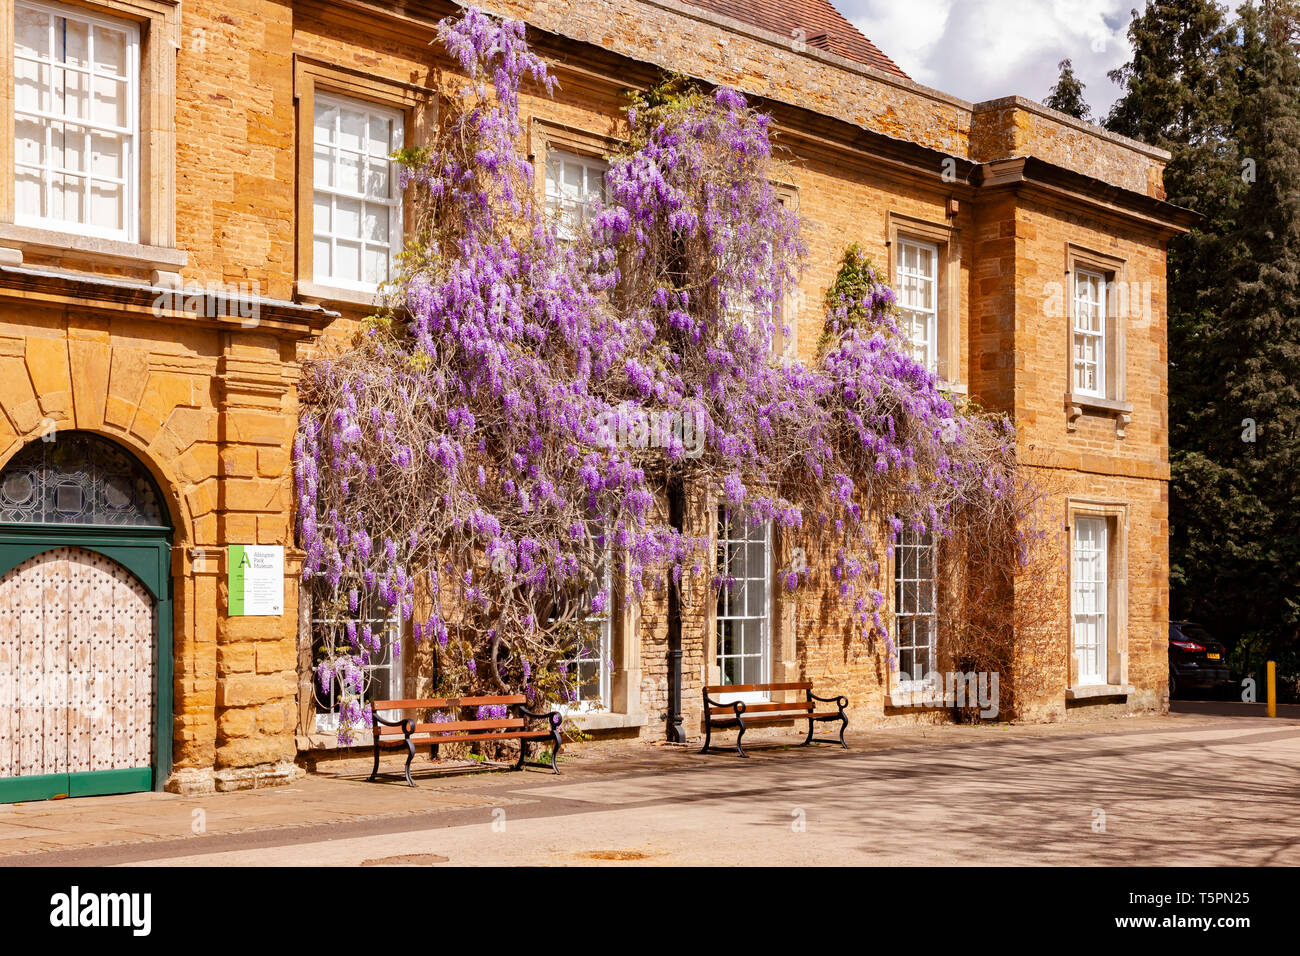 Northampton. 26th April 2019. UK Weather: Weather. Fine weather late morning, Abington Park looking colourful with the wisteria blossom on the front of the Museum. Credit: Keith J Smith./Alamy Live News Stock Photo